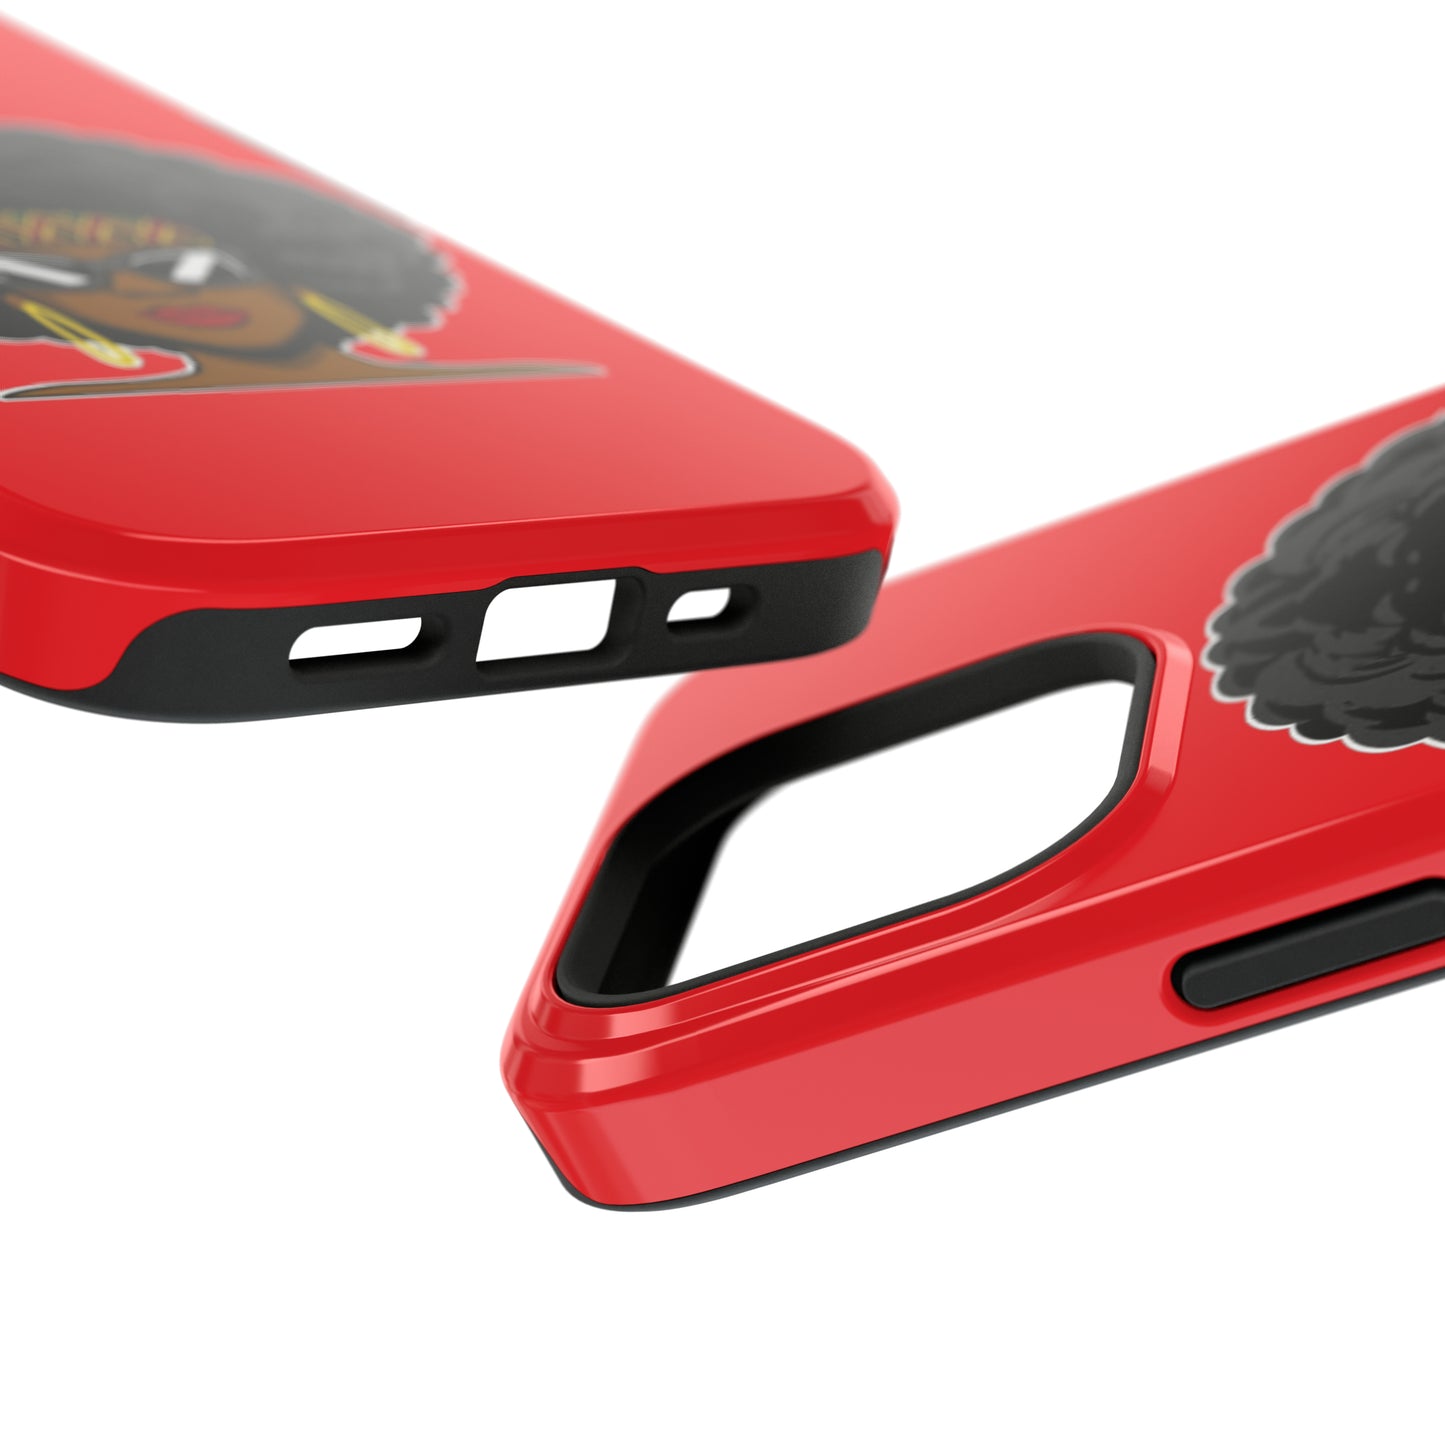 Red Afro Phone Case